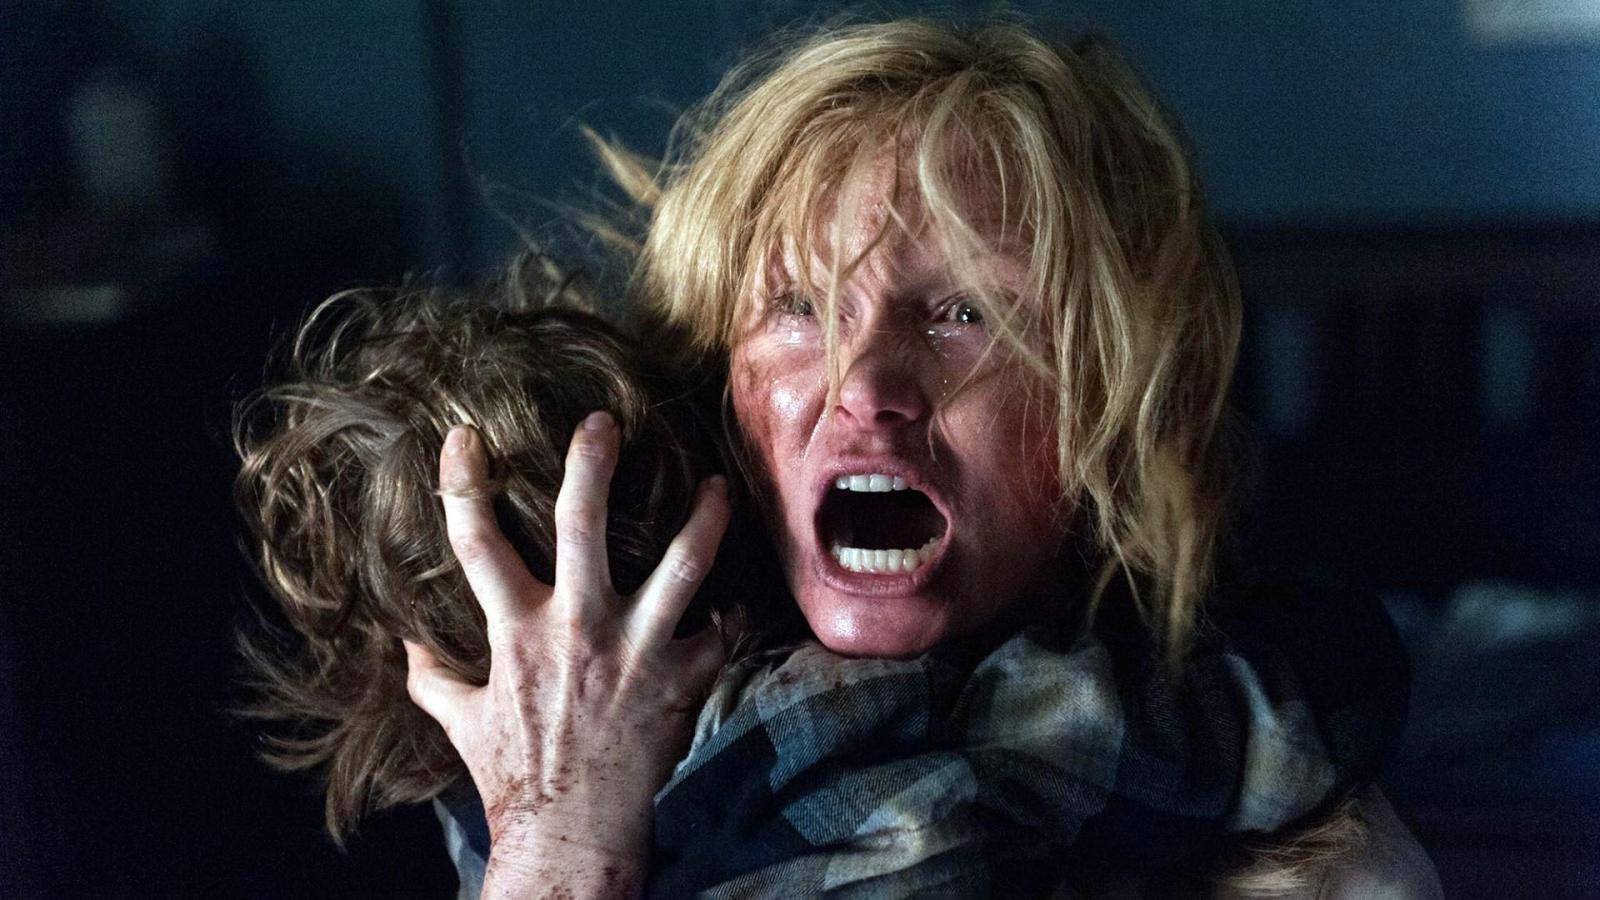 15 Best Movies With Jump Scares to Watch This Halloween - image 7